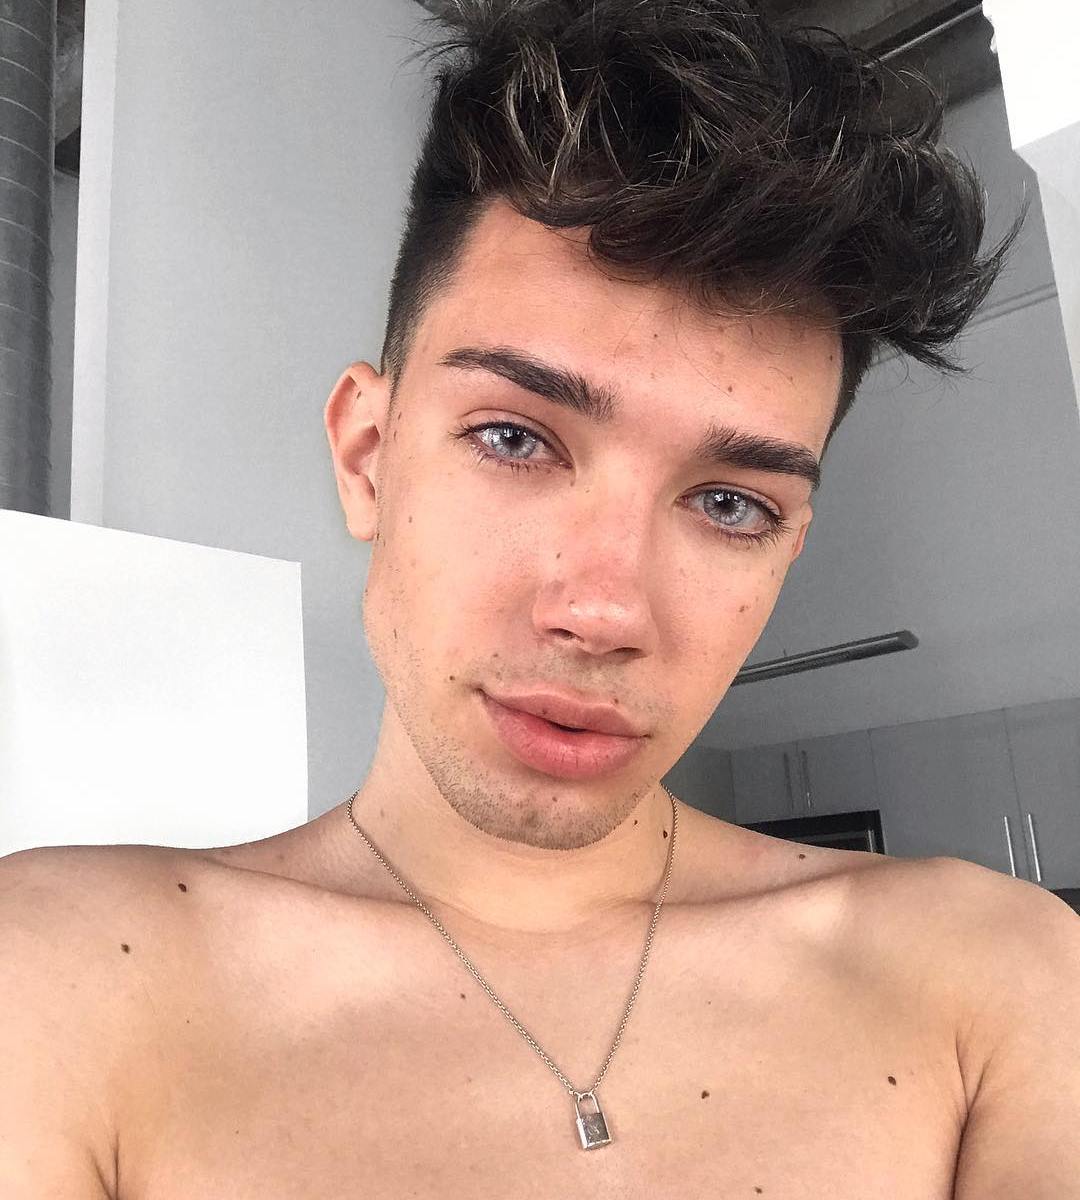 James Charles With No Makeup: YouTuber